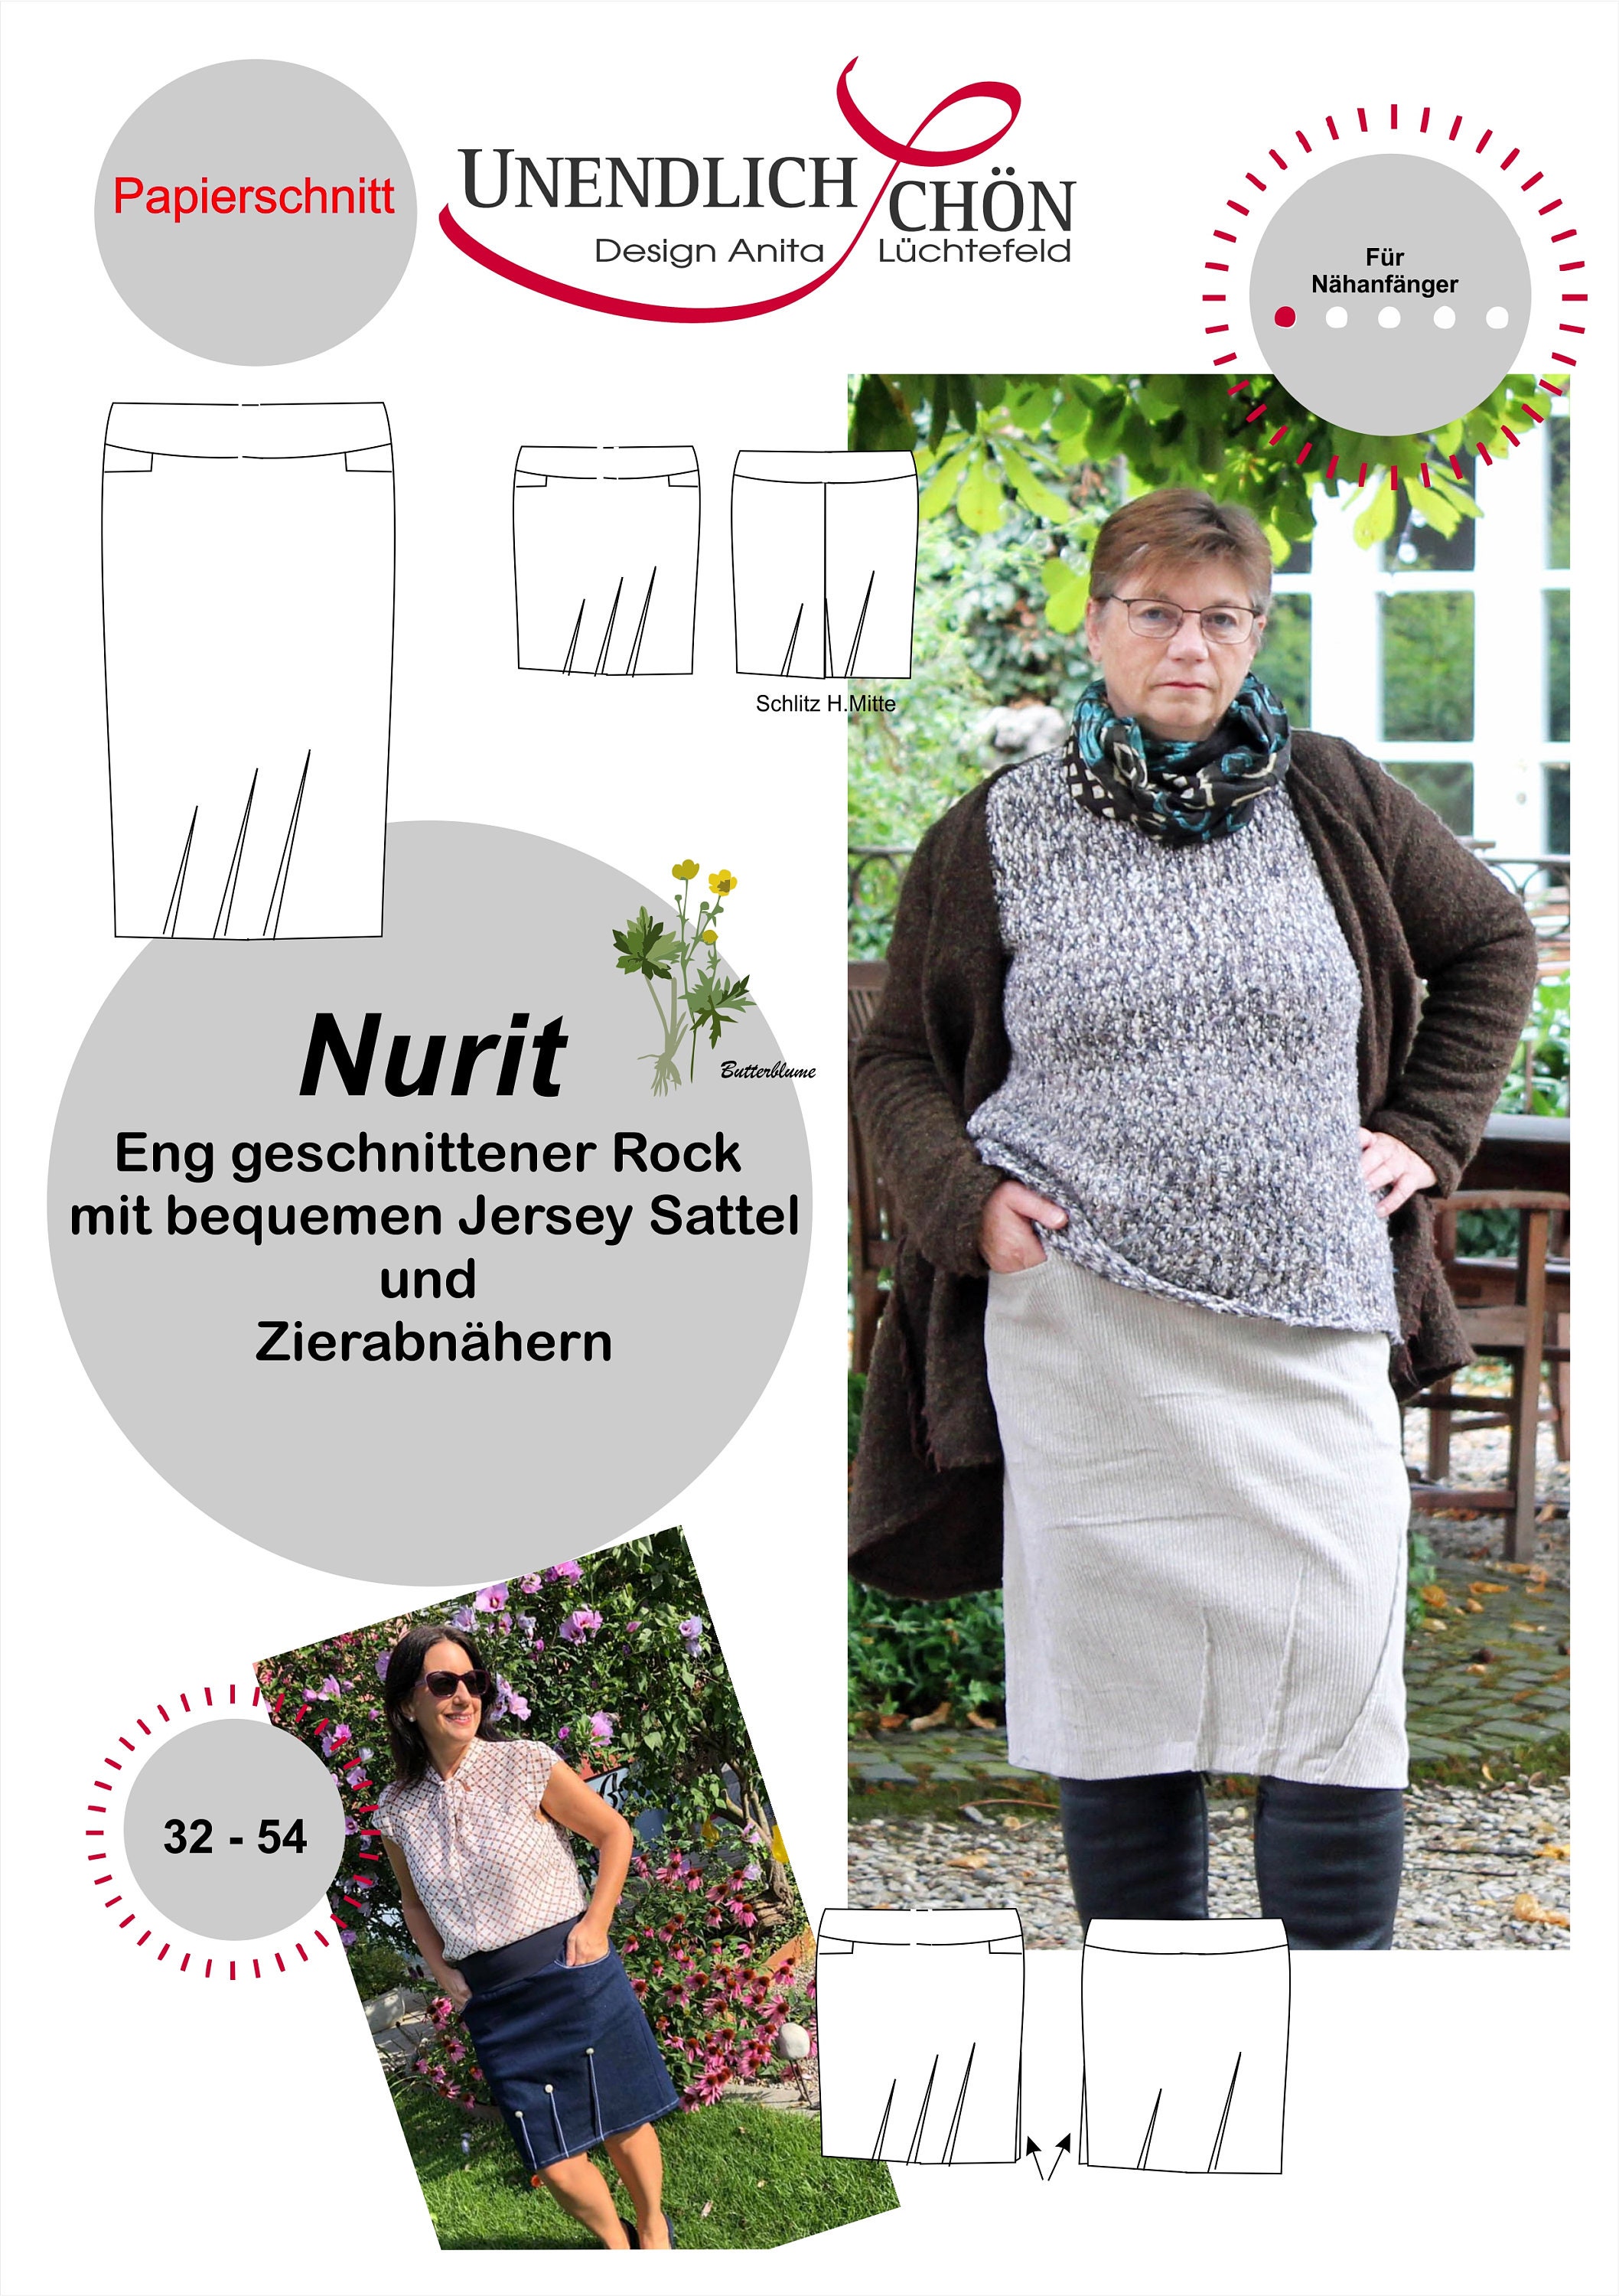 Paper Cut Nurit Tight-fitting Skirt With Decorative Darts in Long and Short  Sizes From 32 54 by Design Anita Lüchtefeld Label Unendlichschoen -   Canada